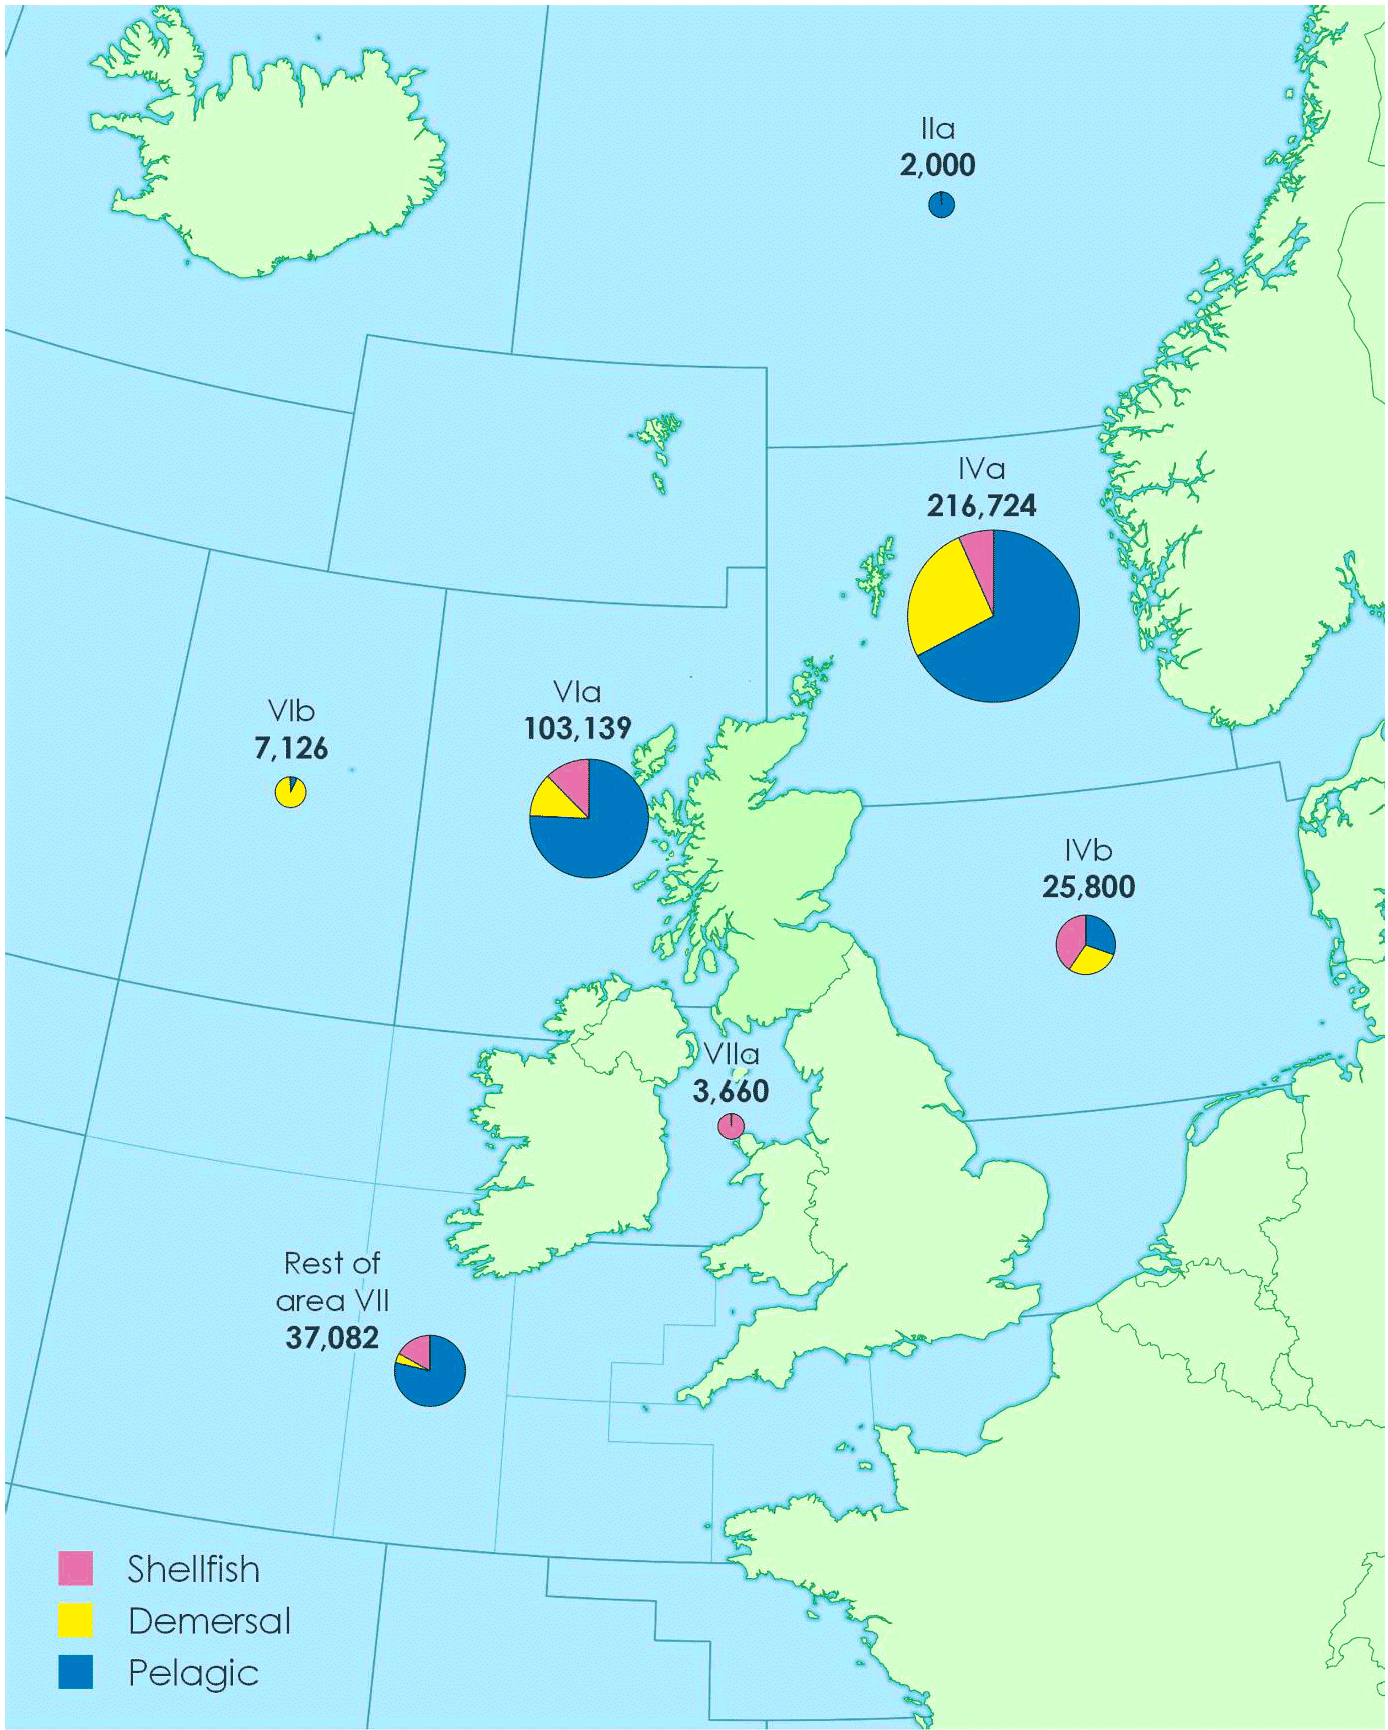 Tonnage landed by Scottish vessels by area of capture and species type in 2020